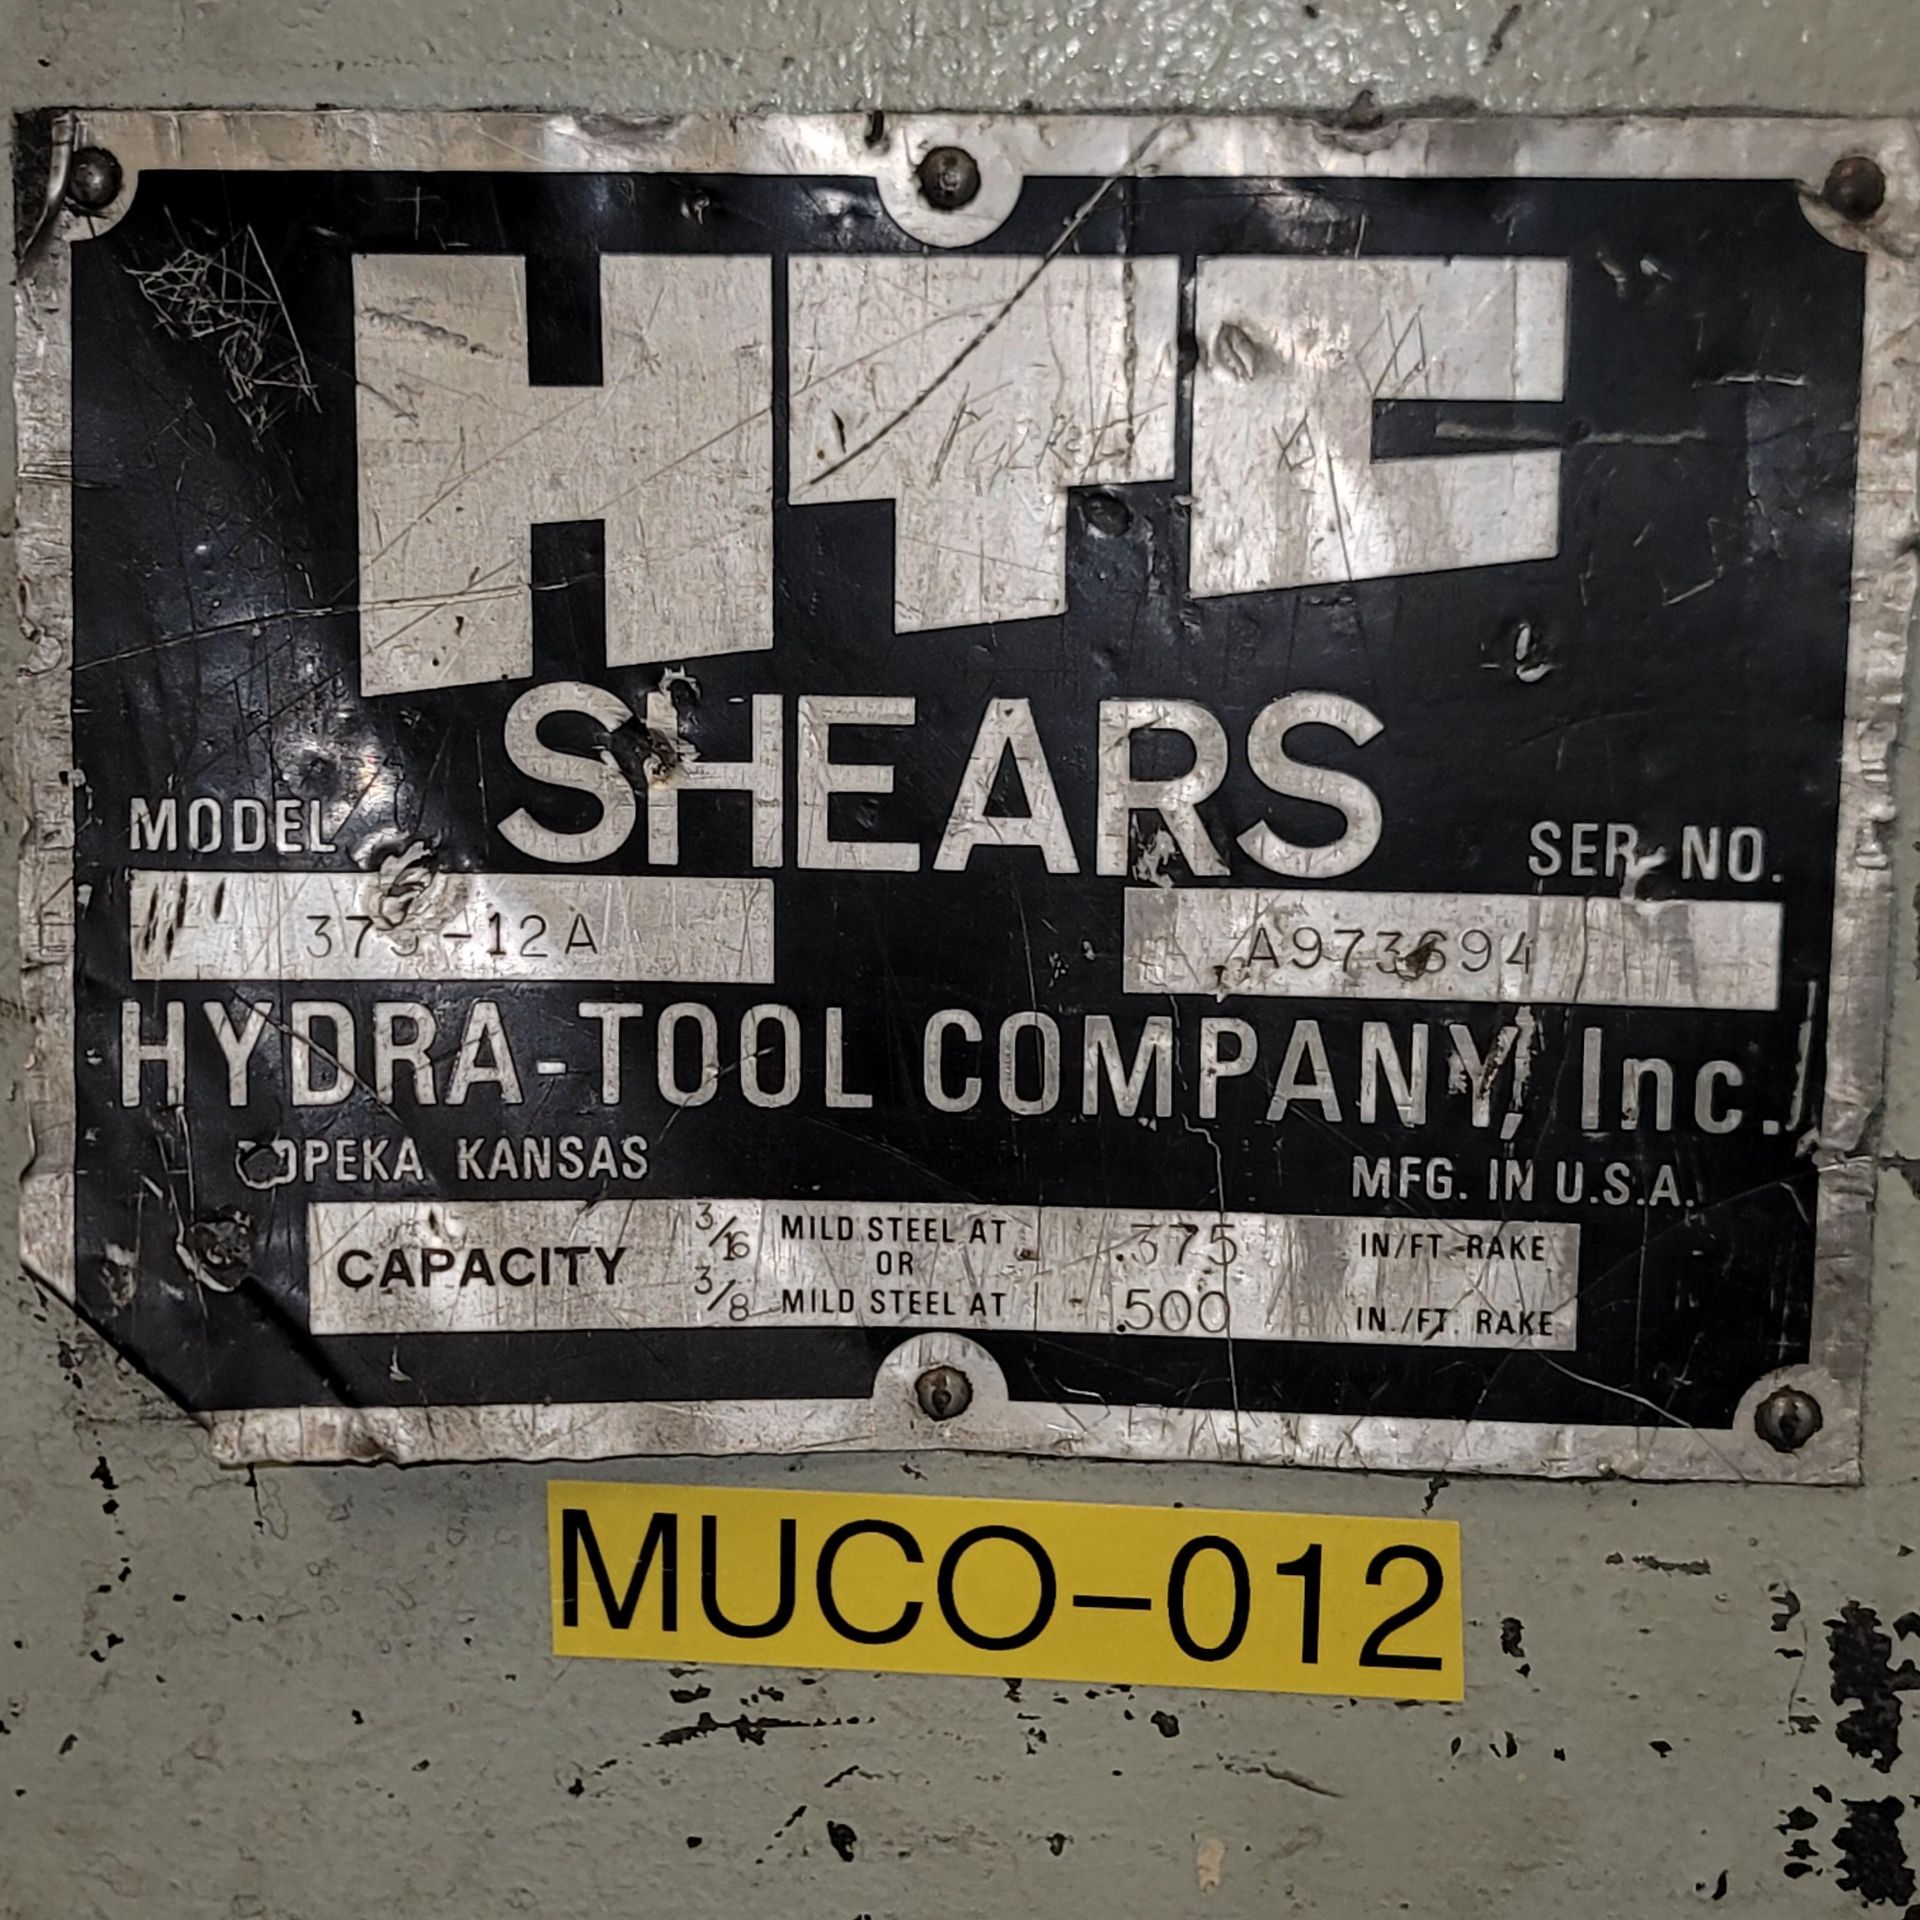 HTC 12' HYDRAULIC SHEAR, MODEL 375-12A, CAPACITY: 3/8" MILD STEEL, 8' SQUARING ARM, S/N A973694, - Image 11 of 12